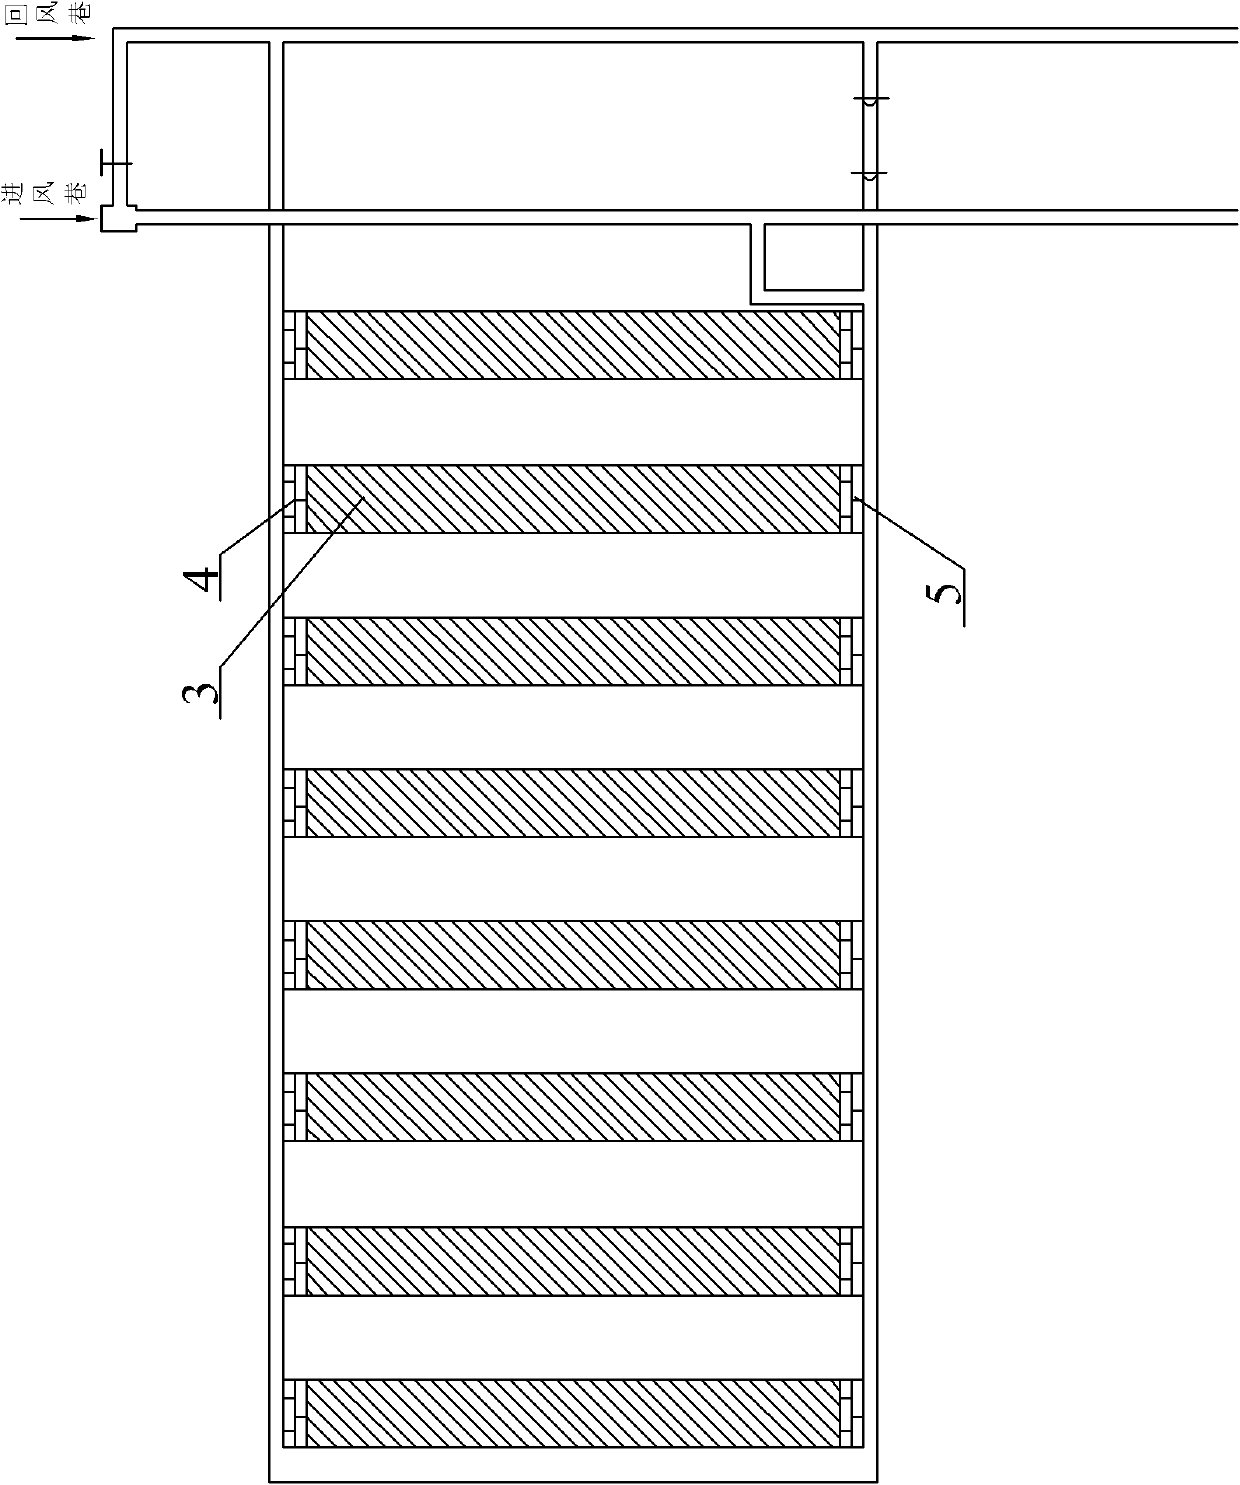 House pillar type cutting and filling method of medium coal seam for controlling movement deformation of overlying rock